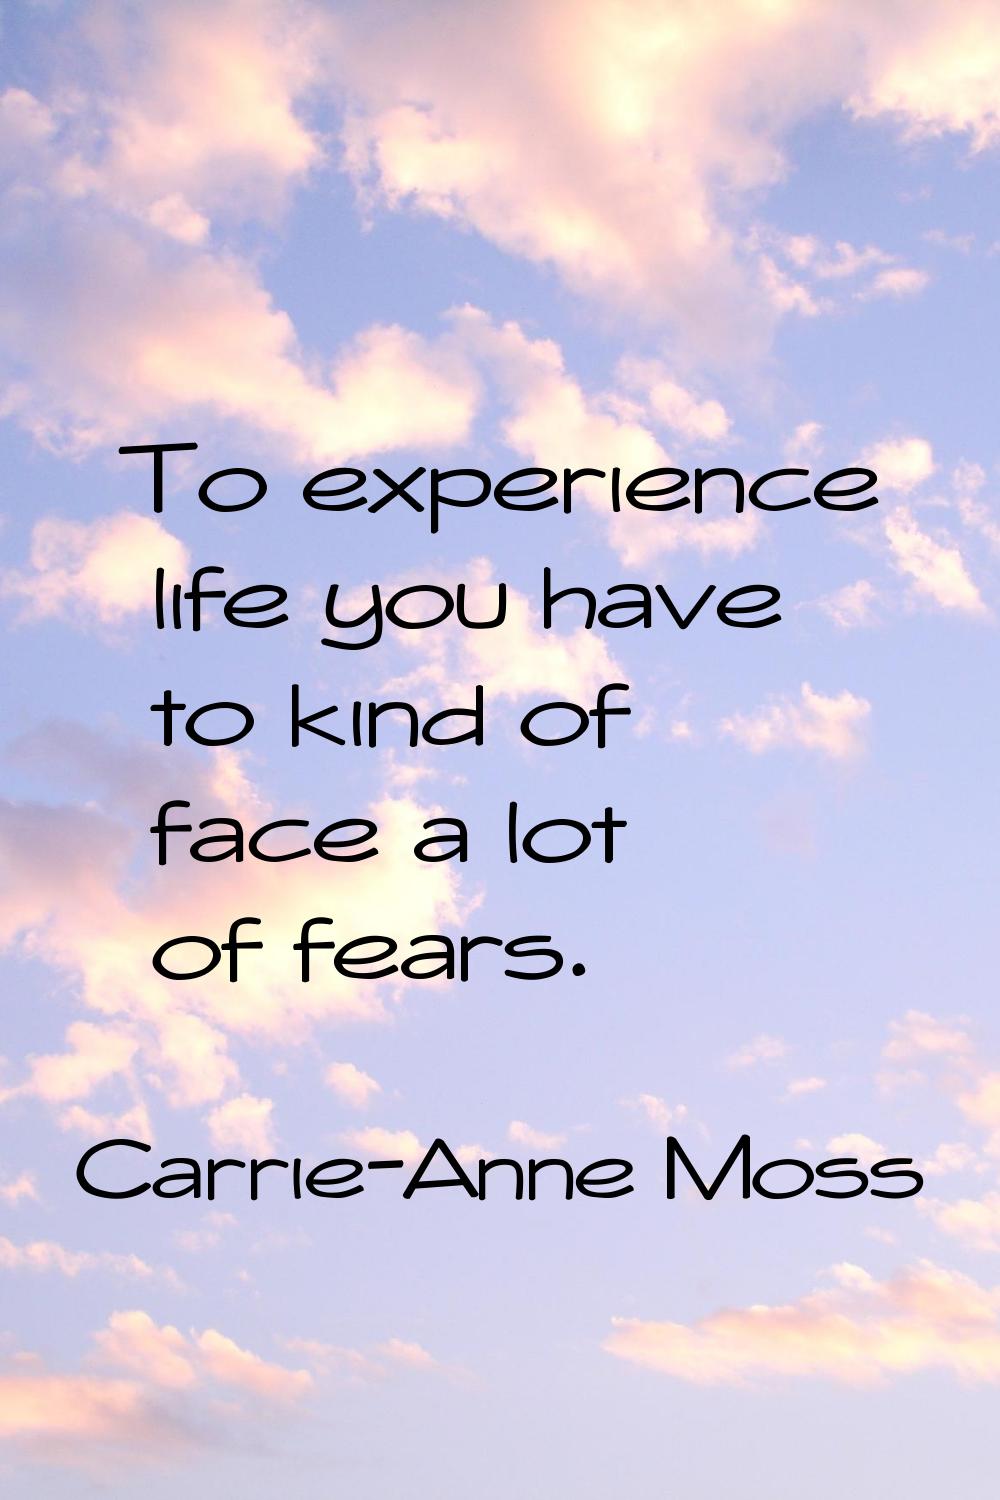 To experience life you have to kind of face a lot of fears.